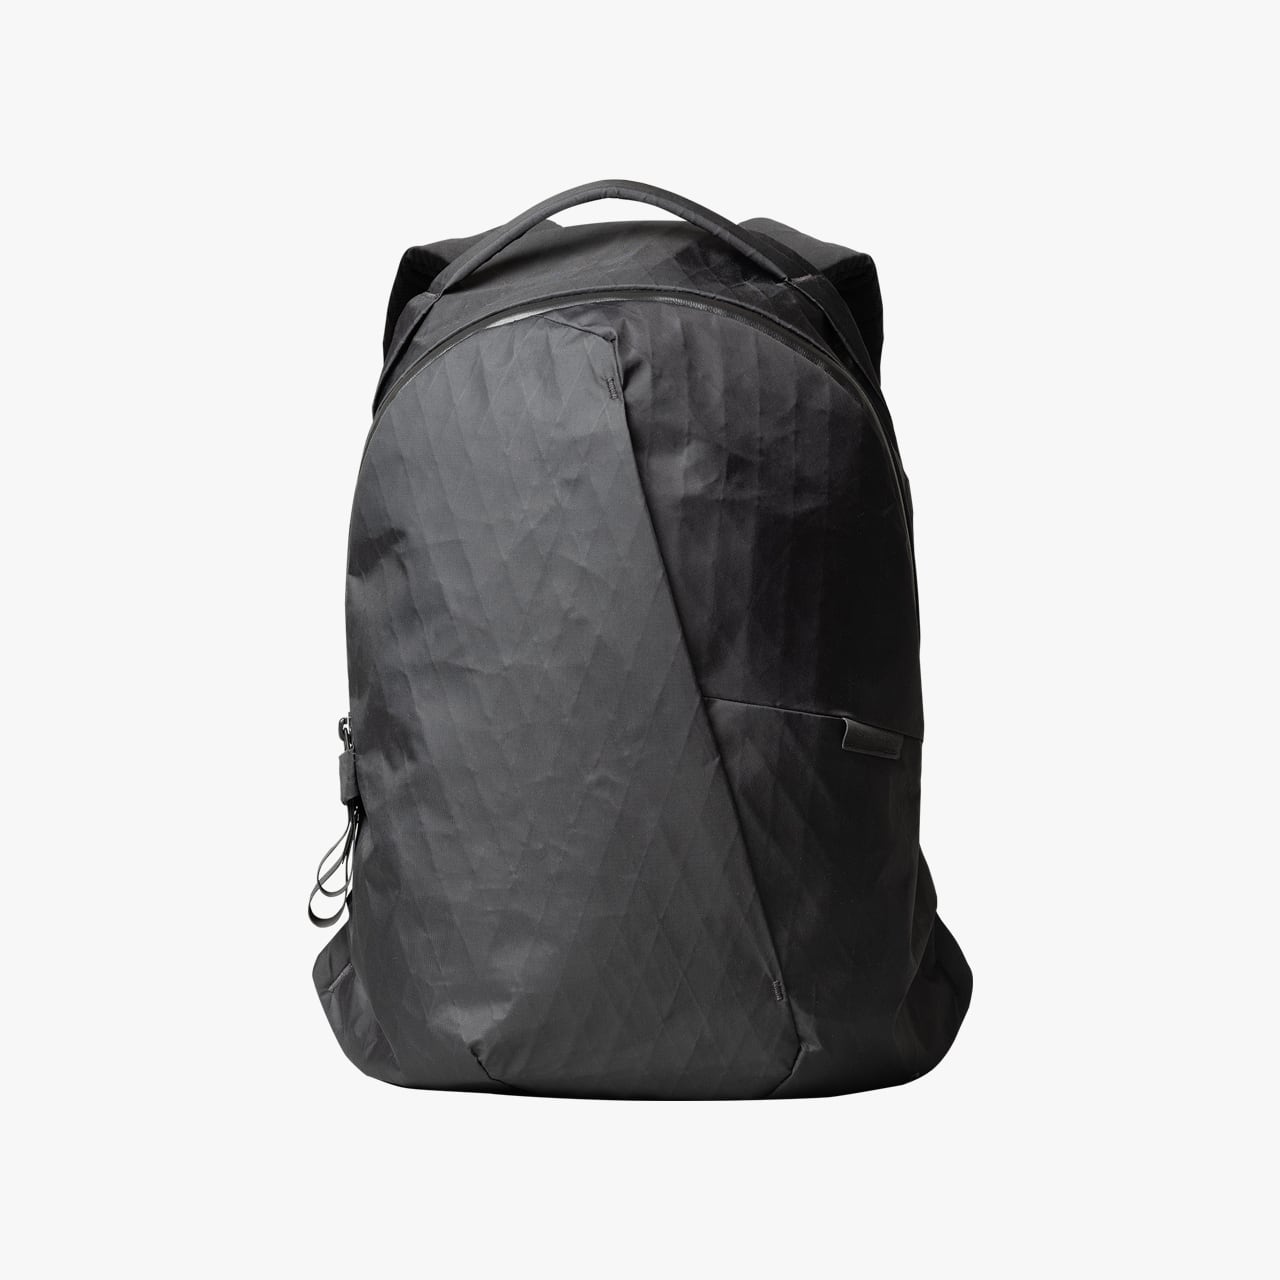 ABLE CARRY   Thirteen Daybag